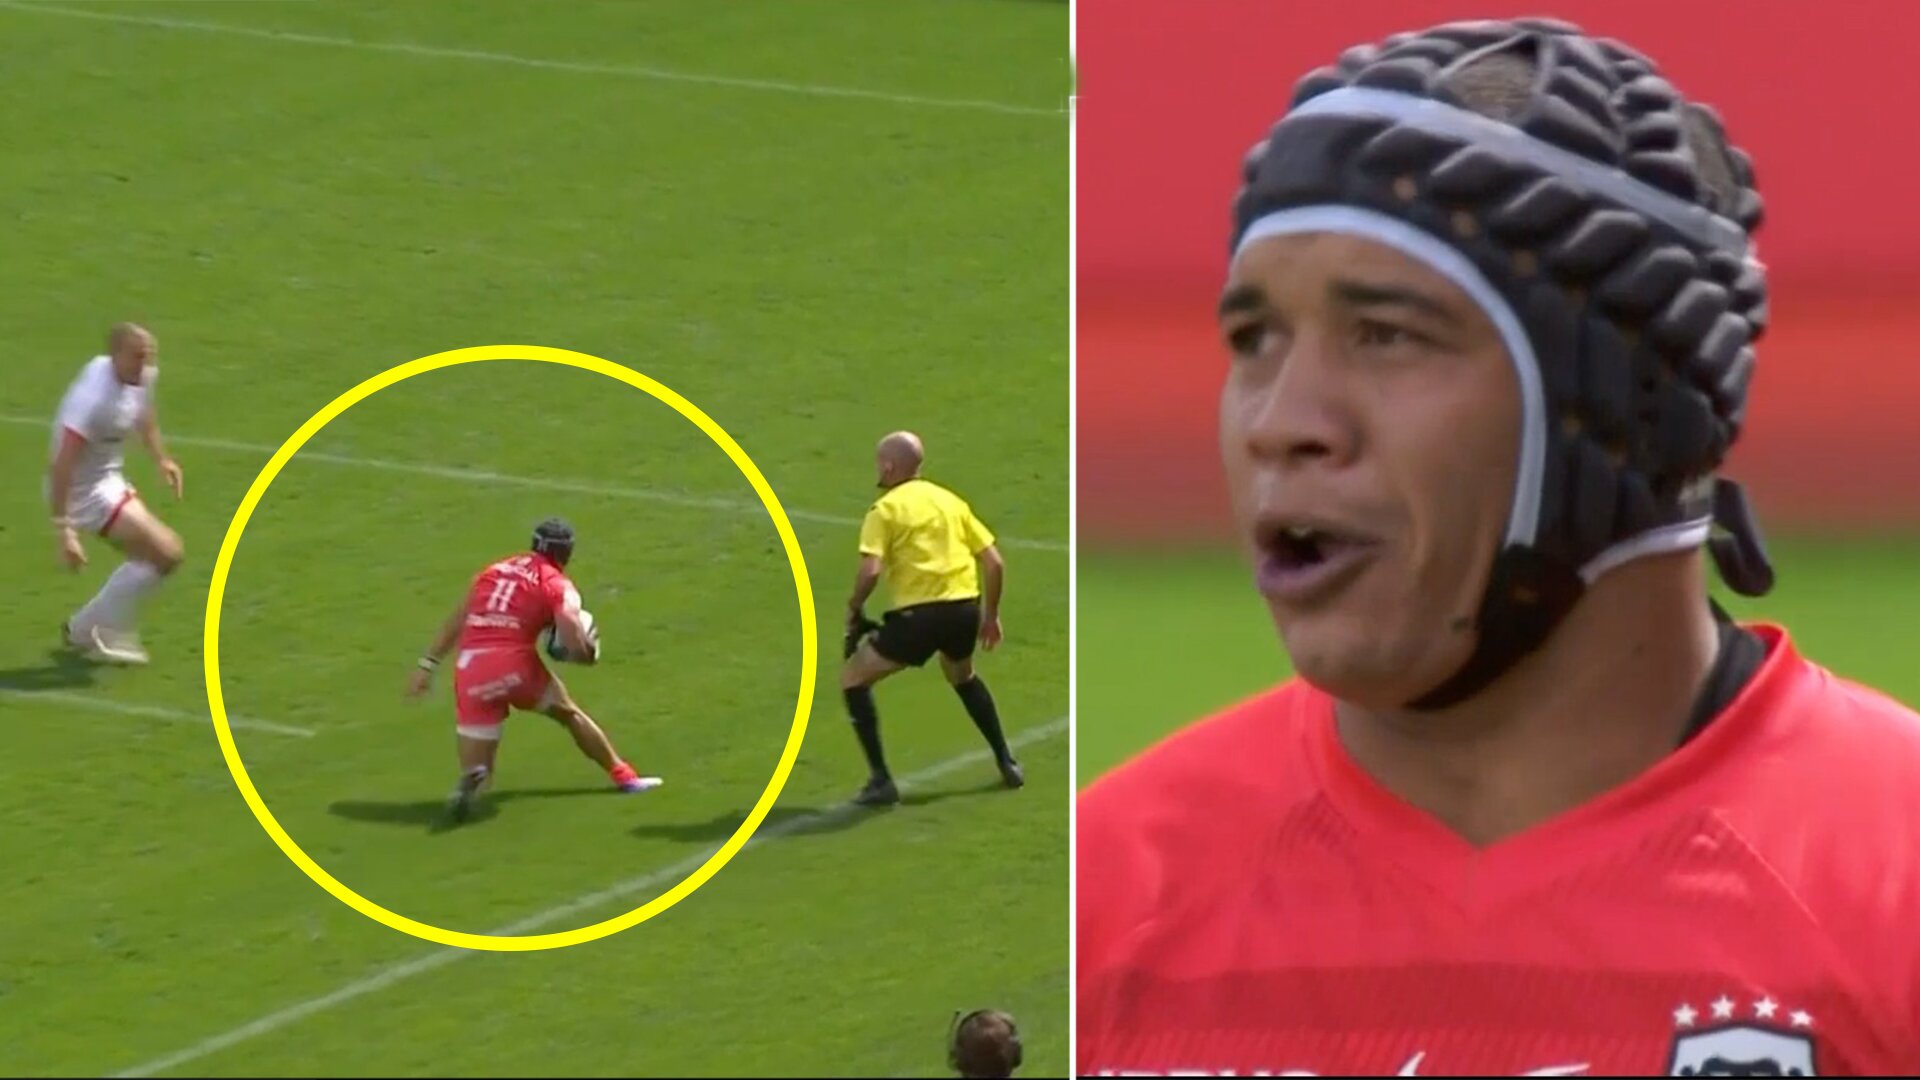 It has taken Cheslin Kolbe 150 seconds to embarrass Jacob Stockdale and the Ulster team